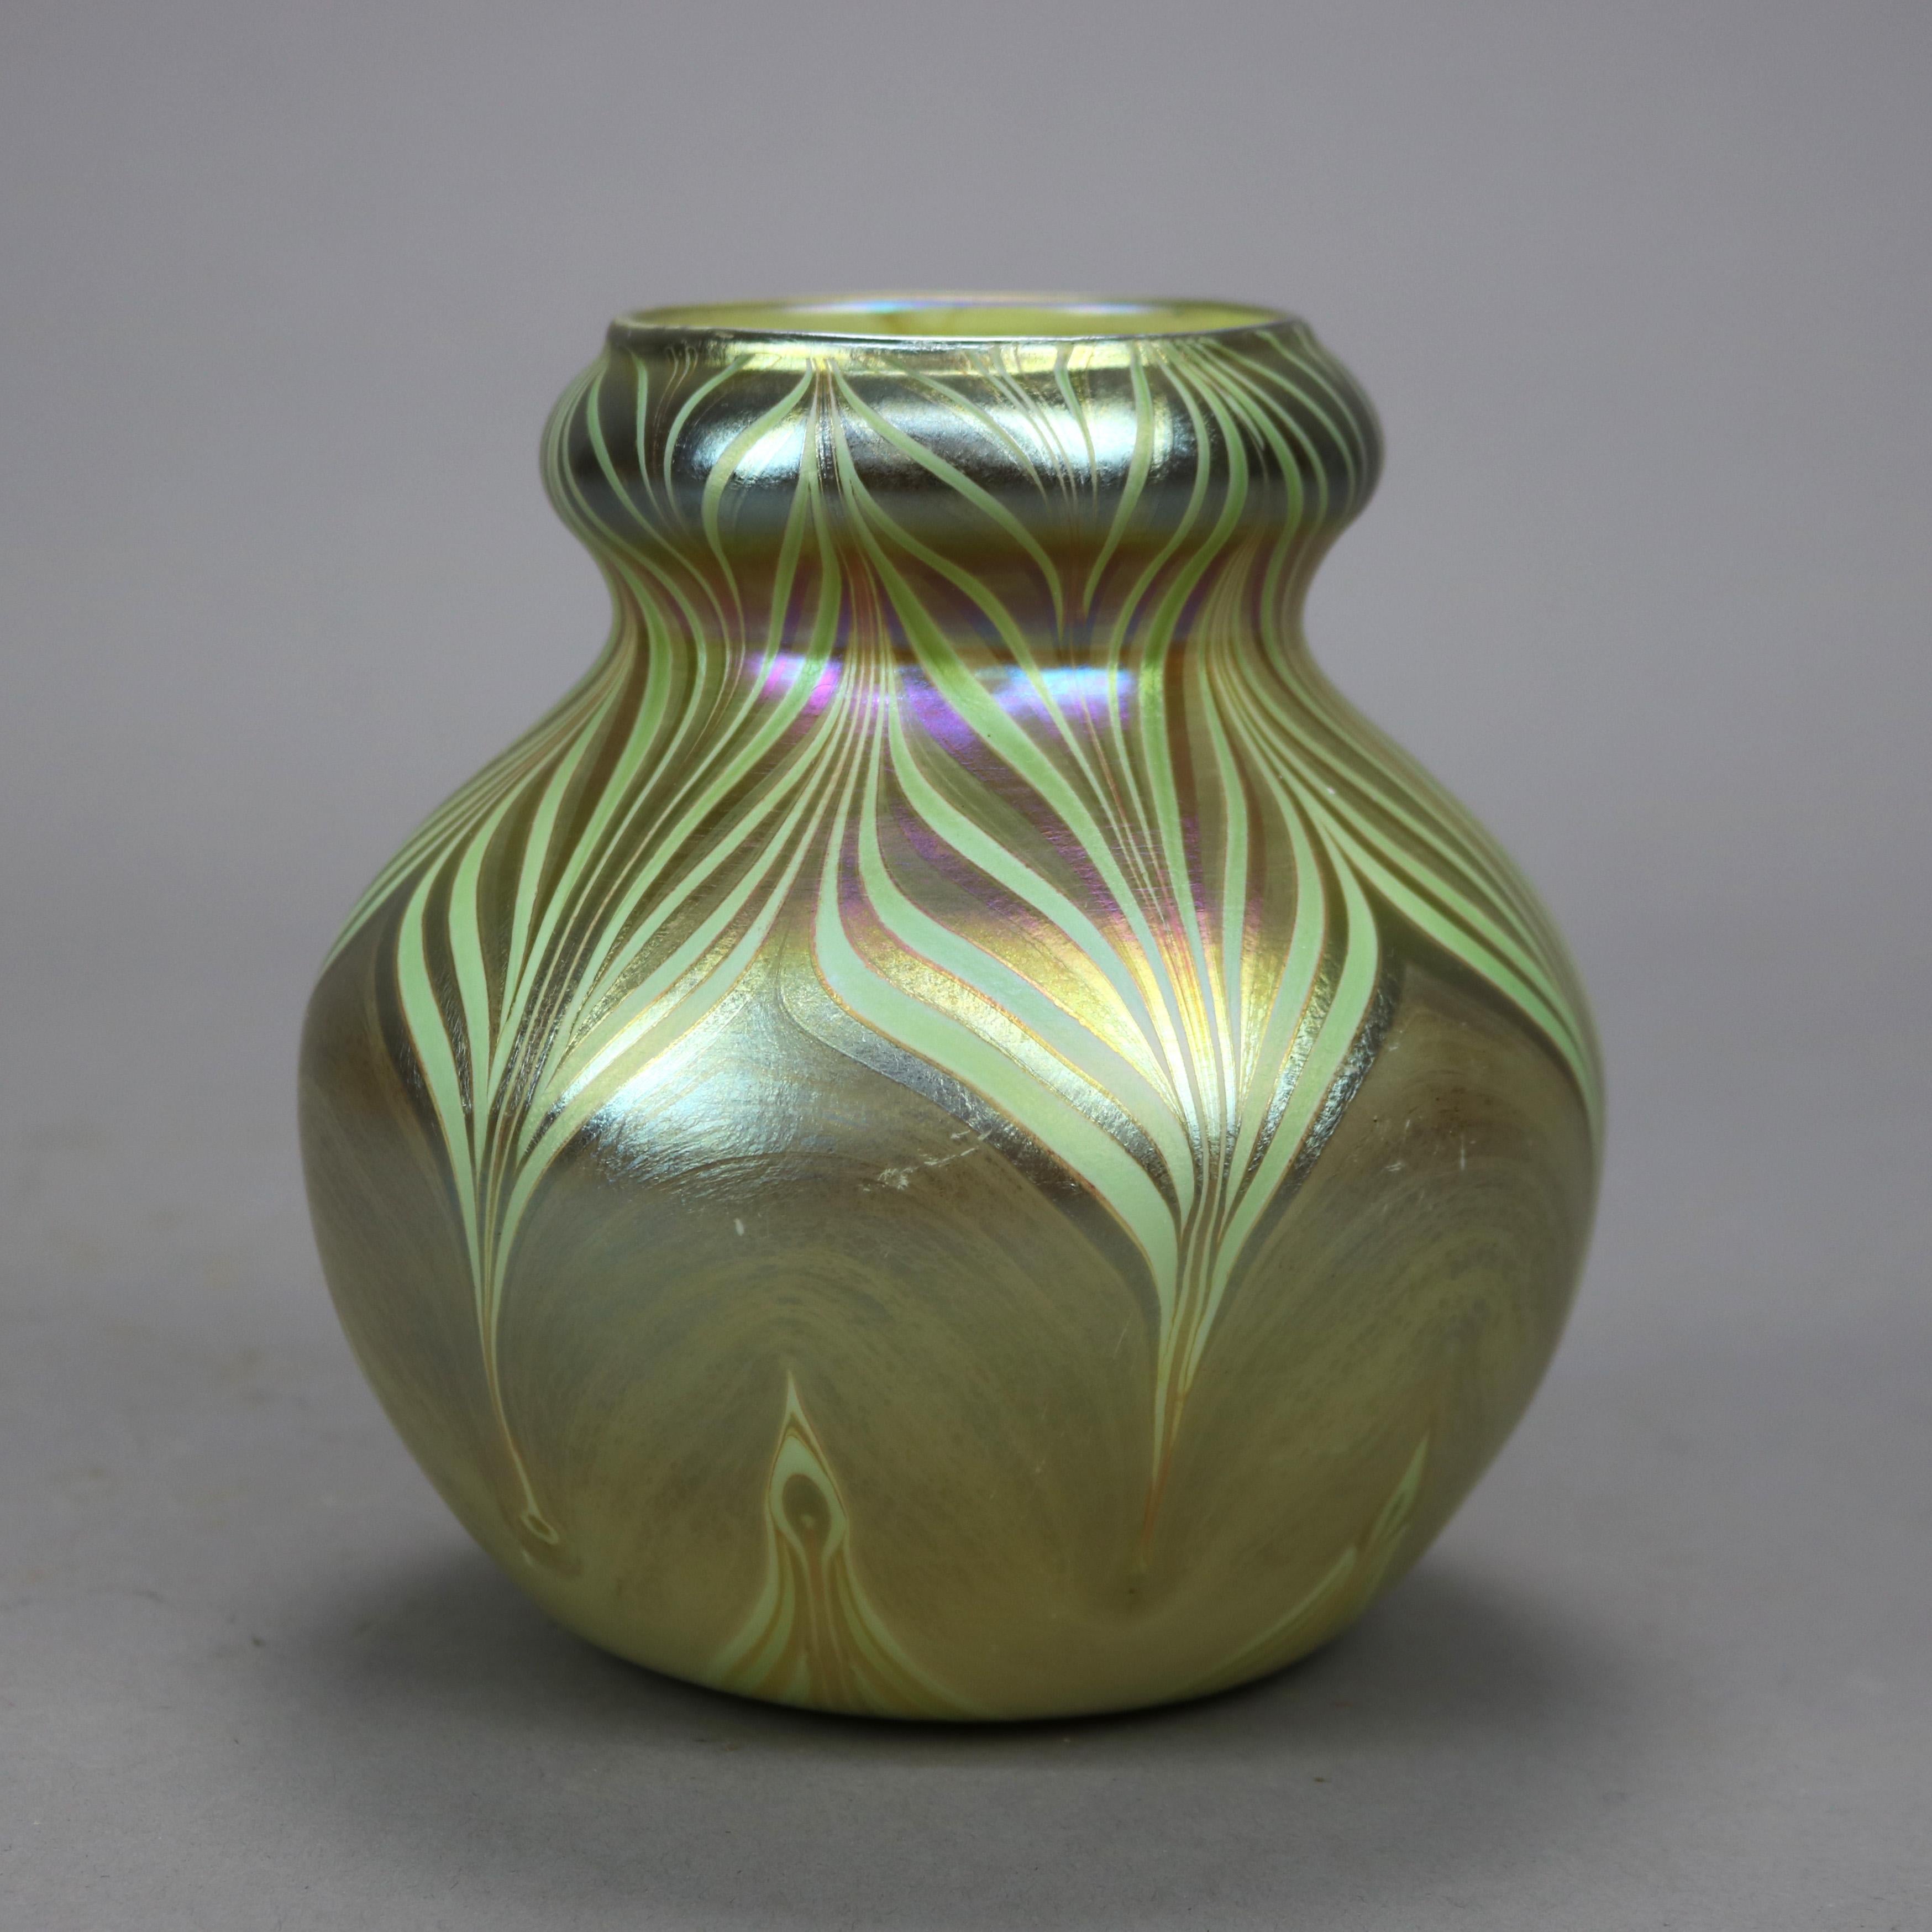 An antique Arts and Crafts vase attributed to Quezal offers art glass construction in bulbous form with pulled feather pattern, unsigned, c1930

Measures - 5.75''H x 5.25''W x 5.25''D.